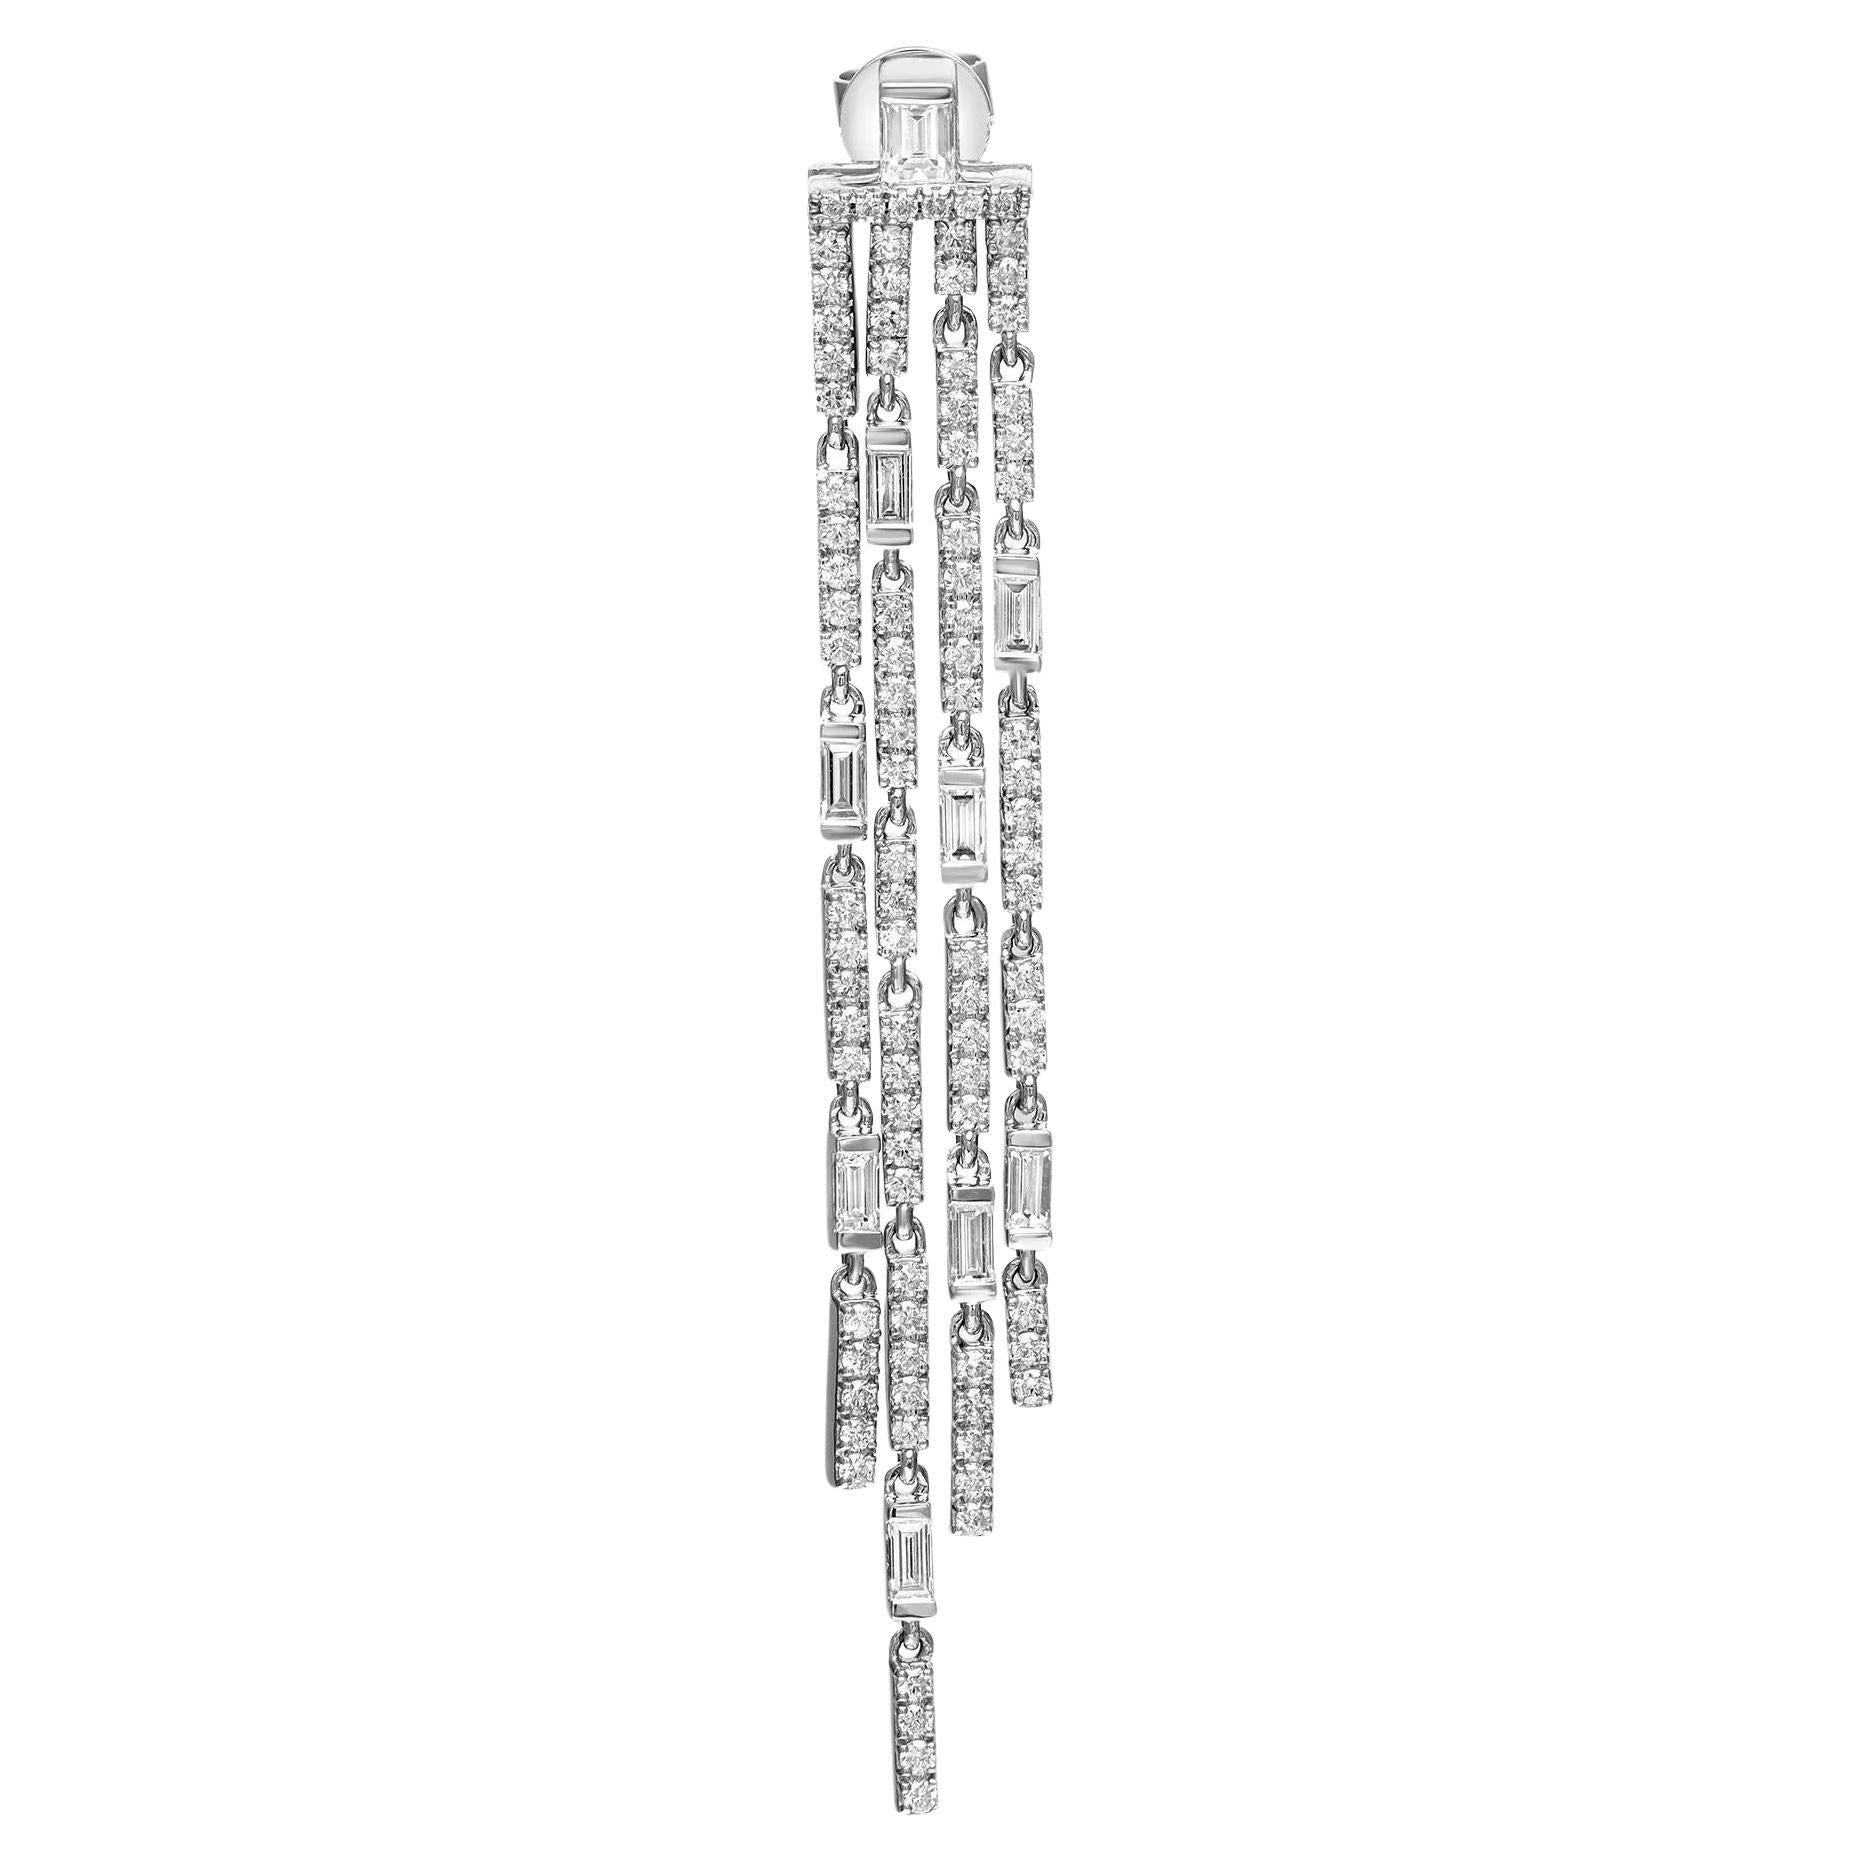 These wonderful pair of chandelier long drop earrings are designed in lustrous 18K white gold studded with baguette and round brilliant cut diamonds. These earrings are studded with a total of 196 diamonds. Total diamond weight: 2.65 carats. Diamond